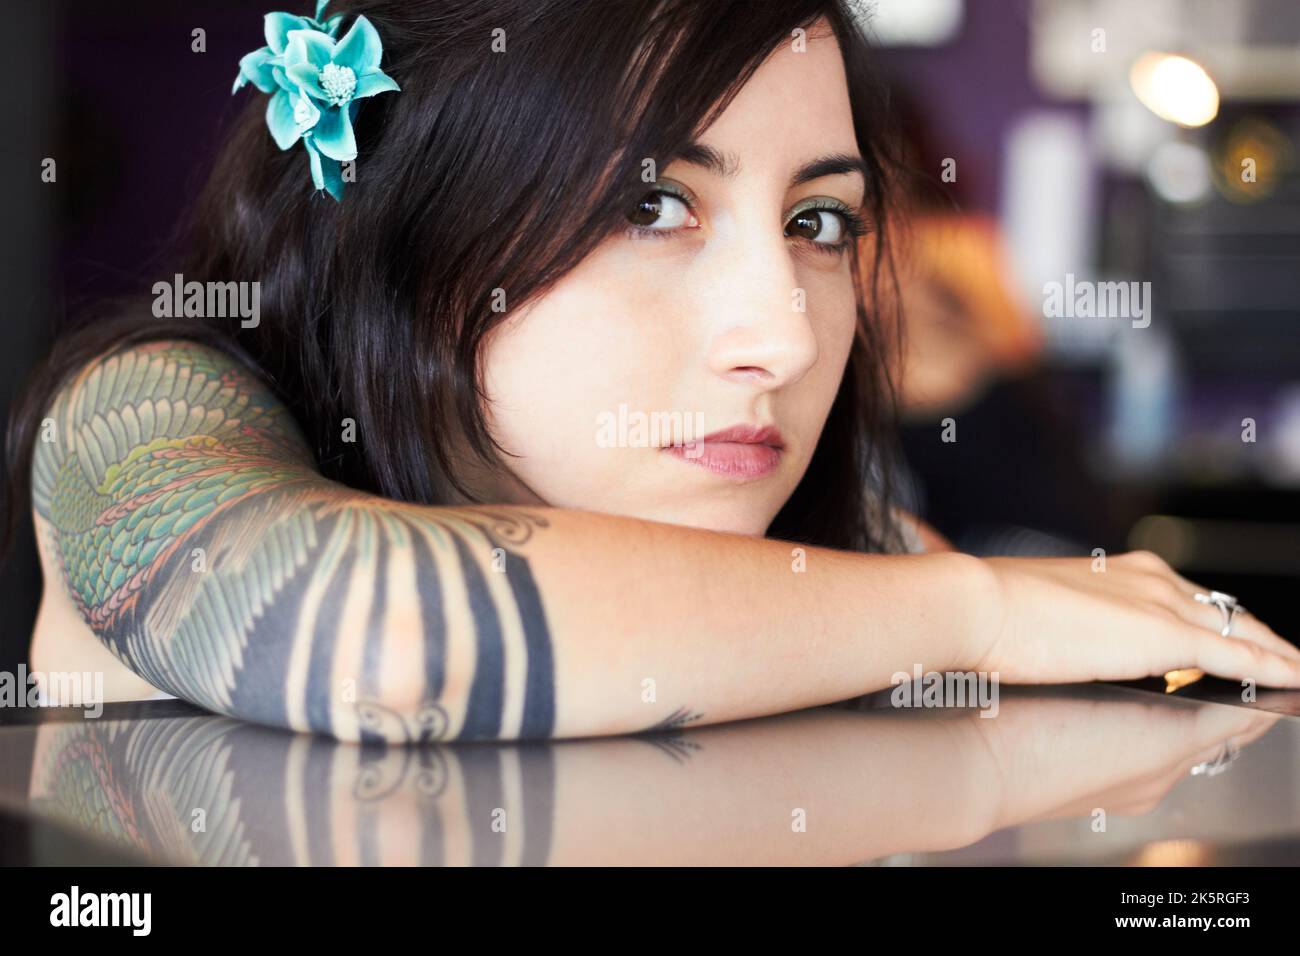 Expressing her identity through art. A young tattoo artist showing off her half-sleeve tattoo while resting her head on her arm. Stock Photo